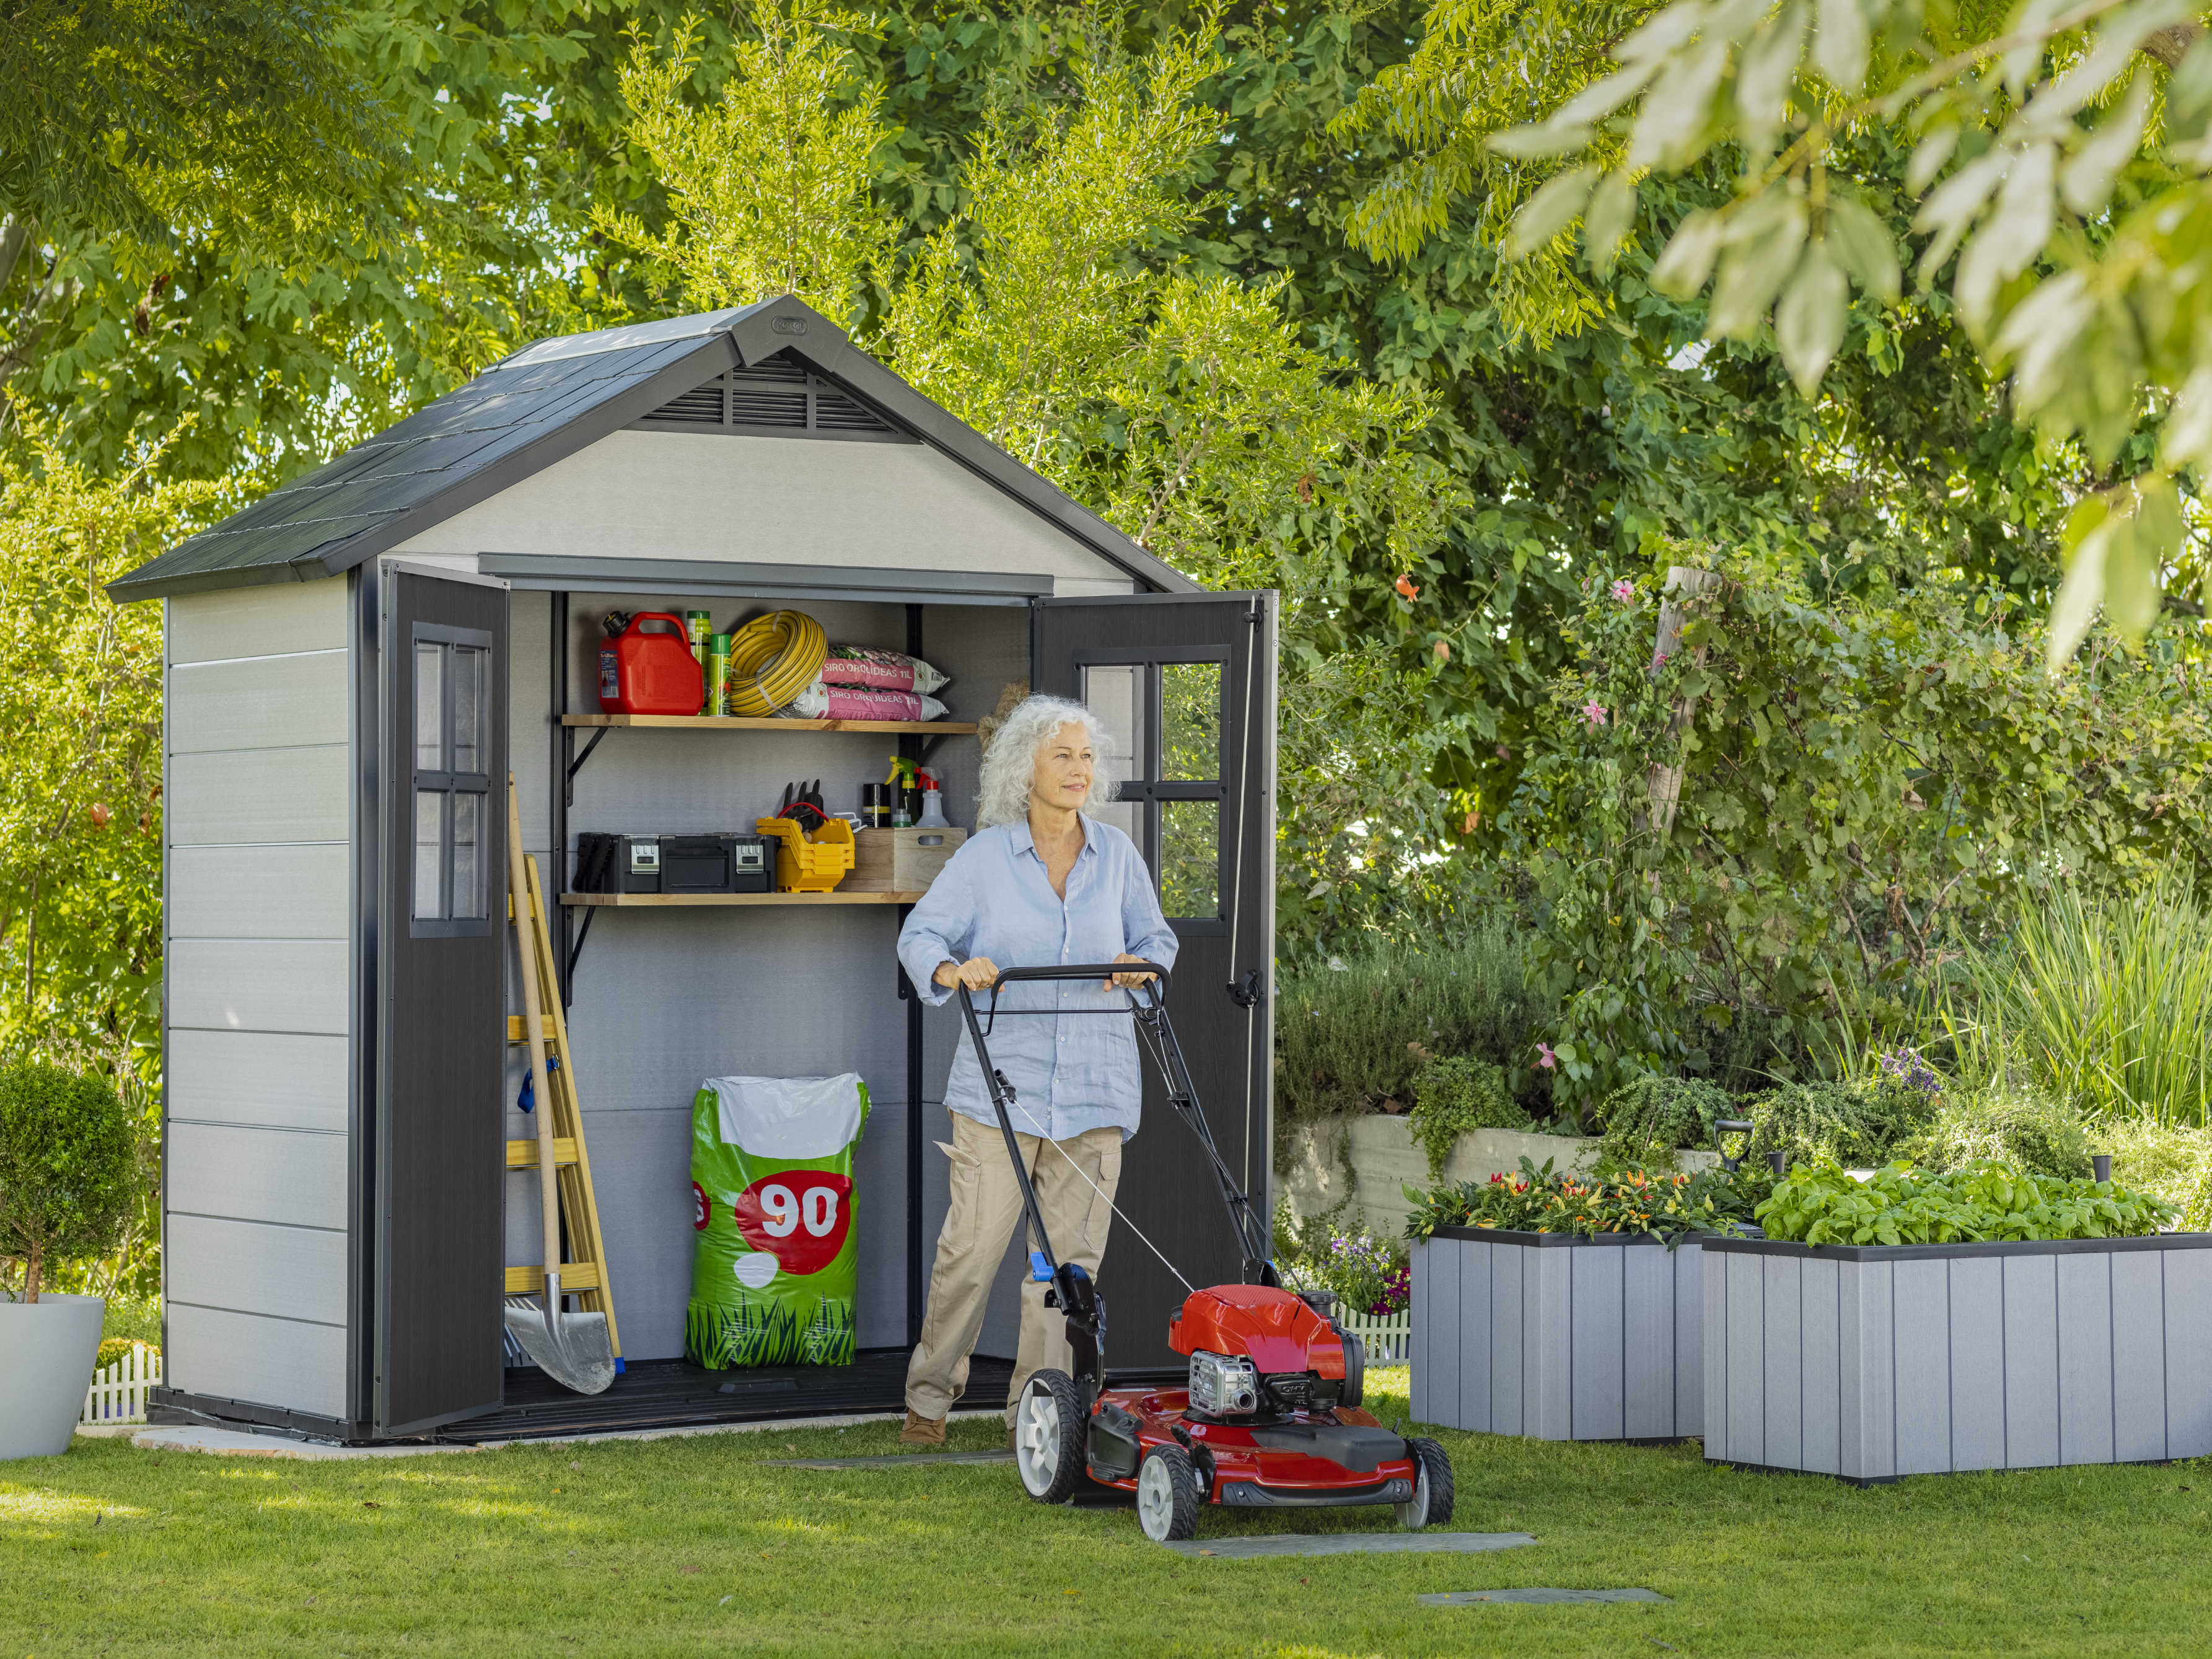 Keter Oakland 754 with woman mowing the lawns